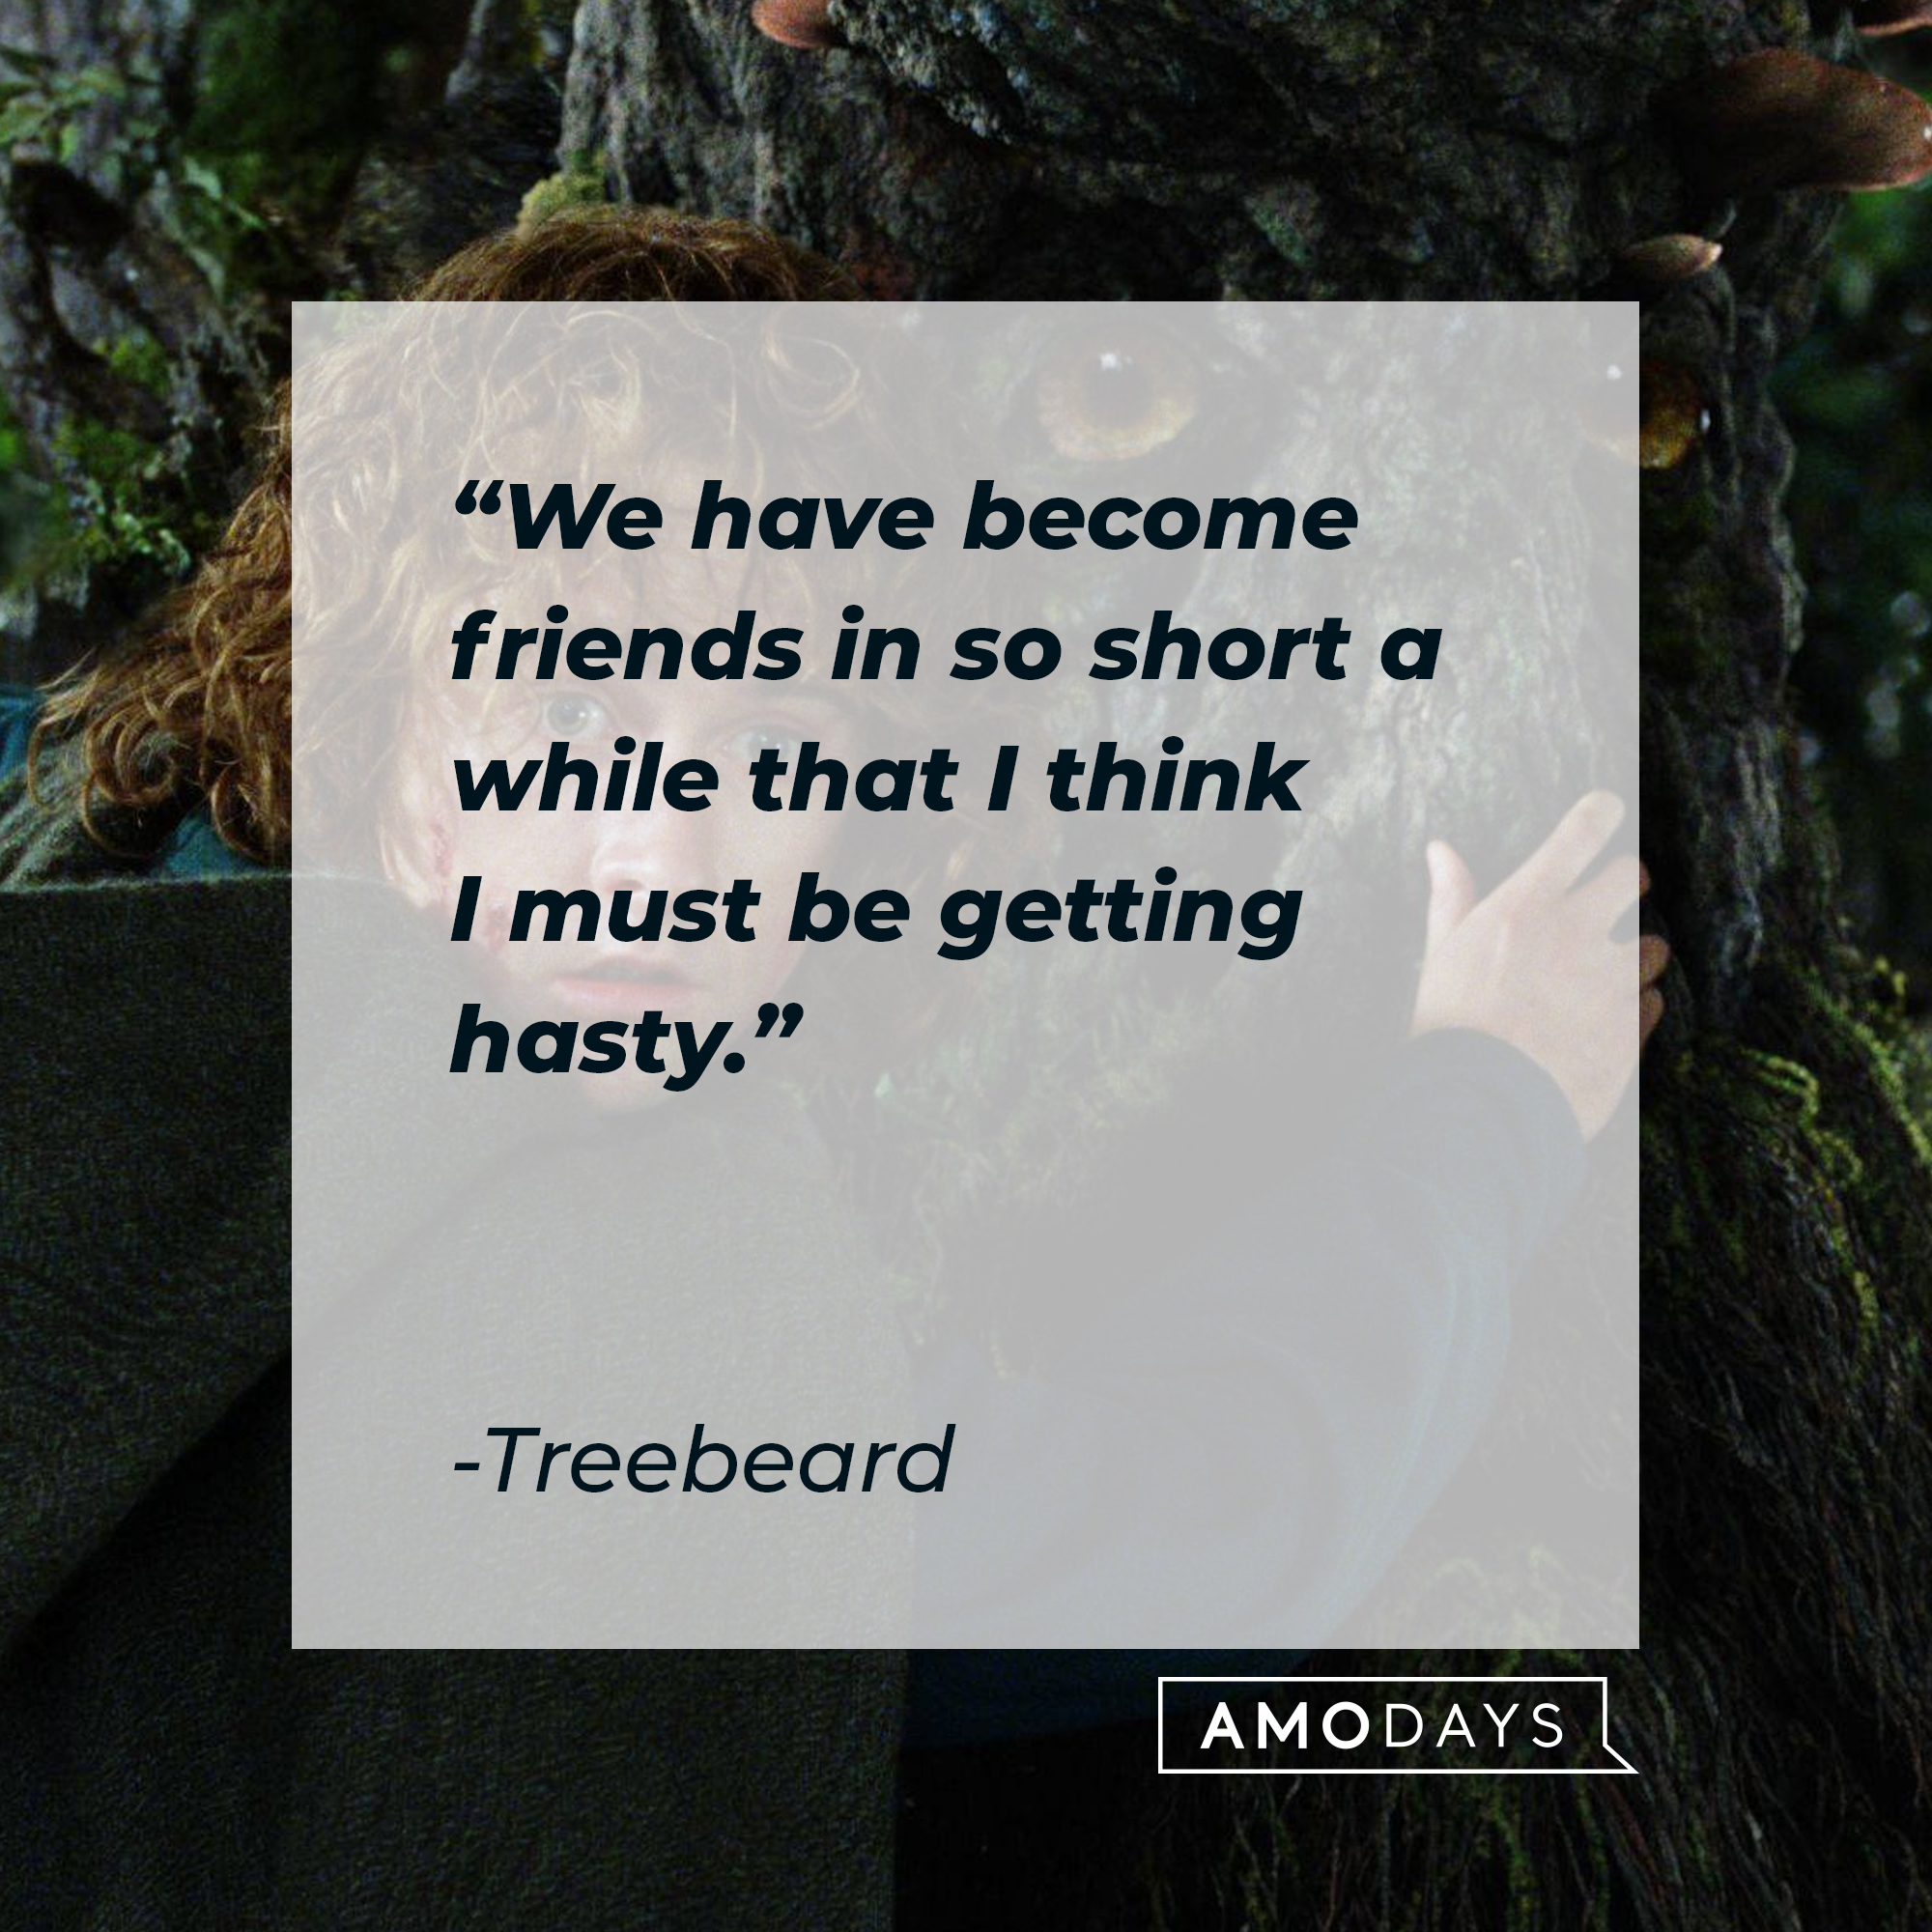 Treebeard with his quote from "The Lord of the Rings:" "We have become friends in so short a while that I think I must be getting hasty." | Source: Facebook/lordoftheringstrilogy